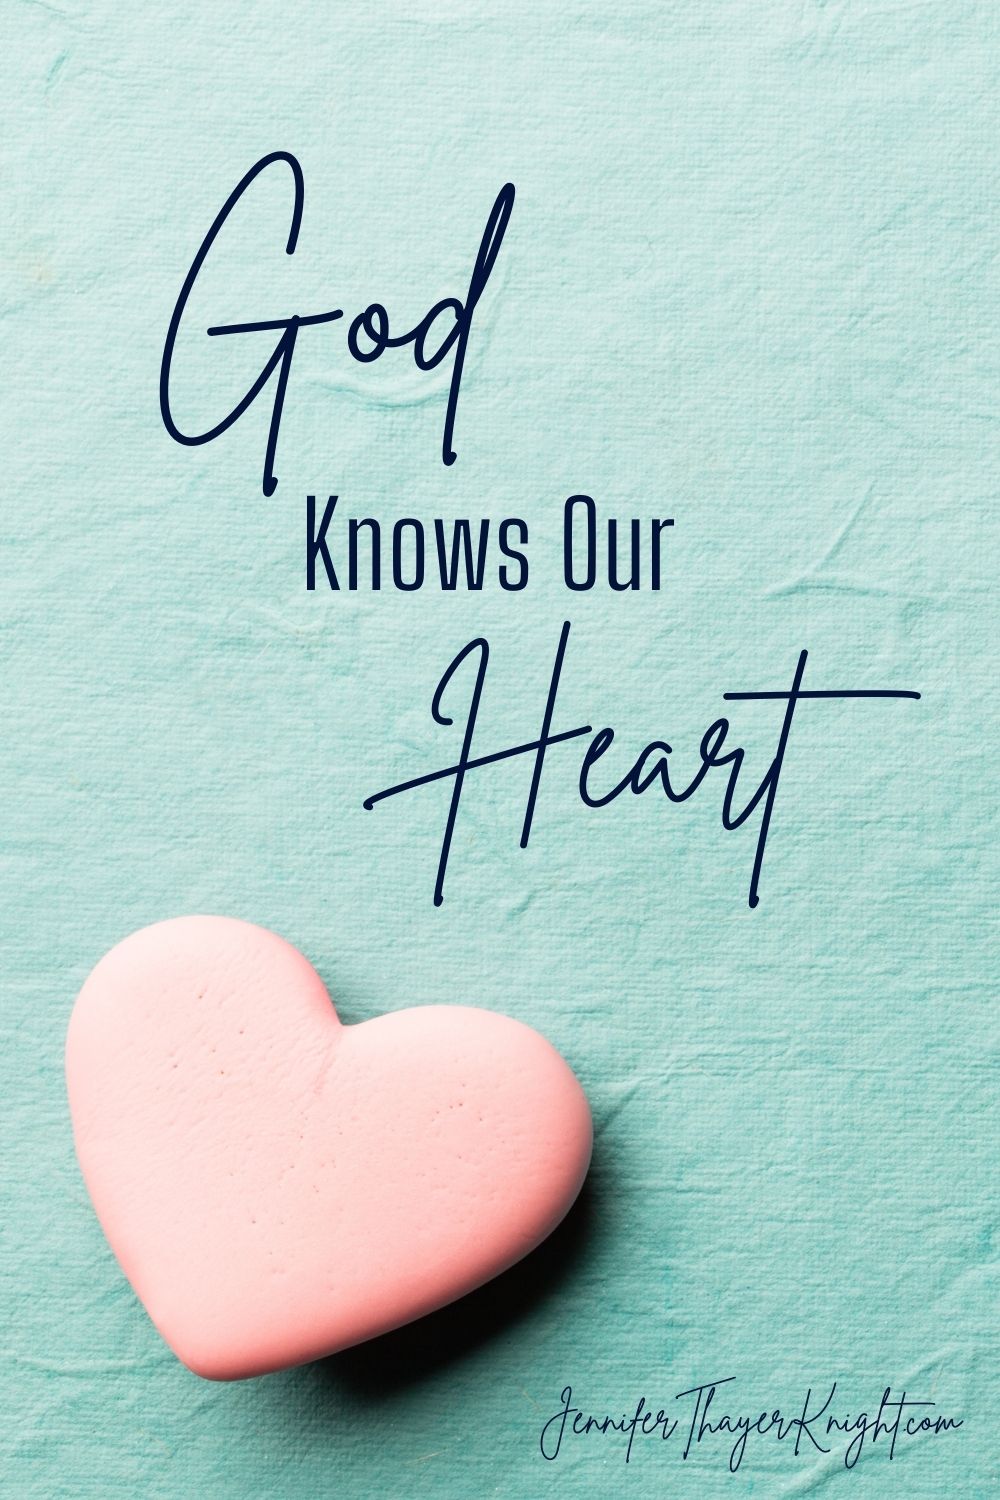 God Knows Our Heart - Blog Post Title